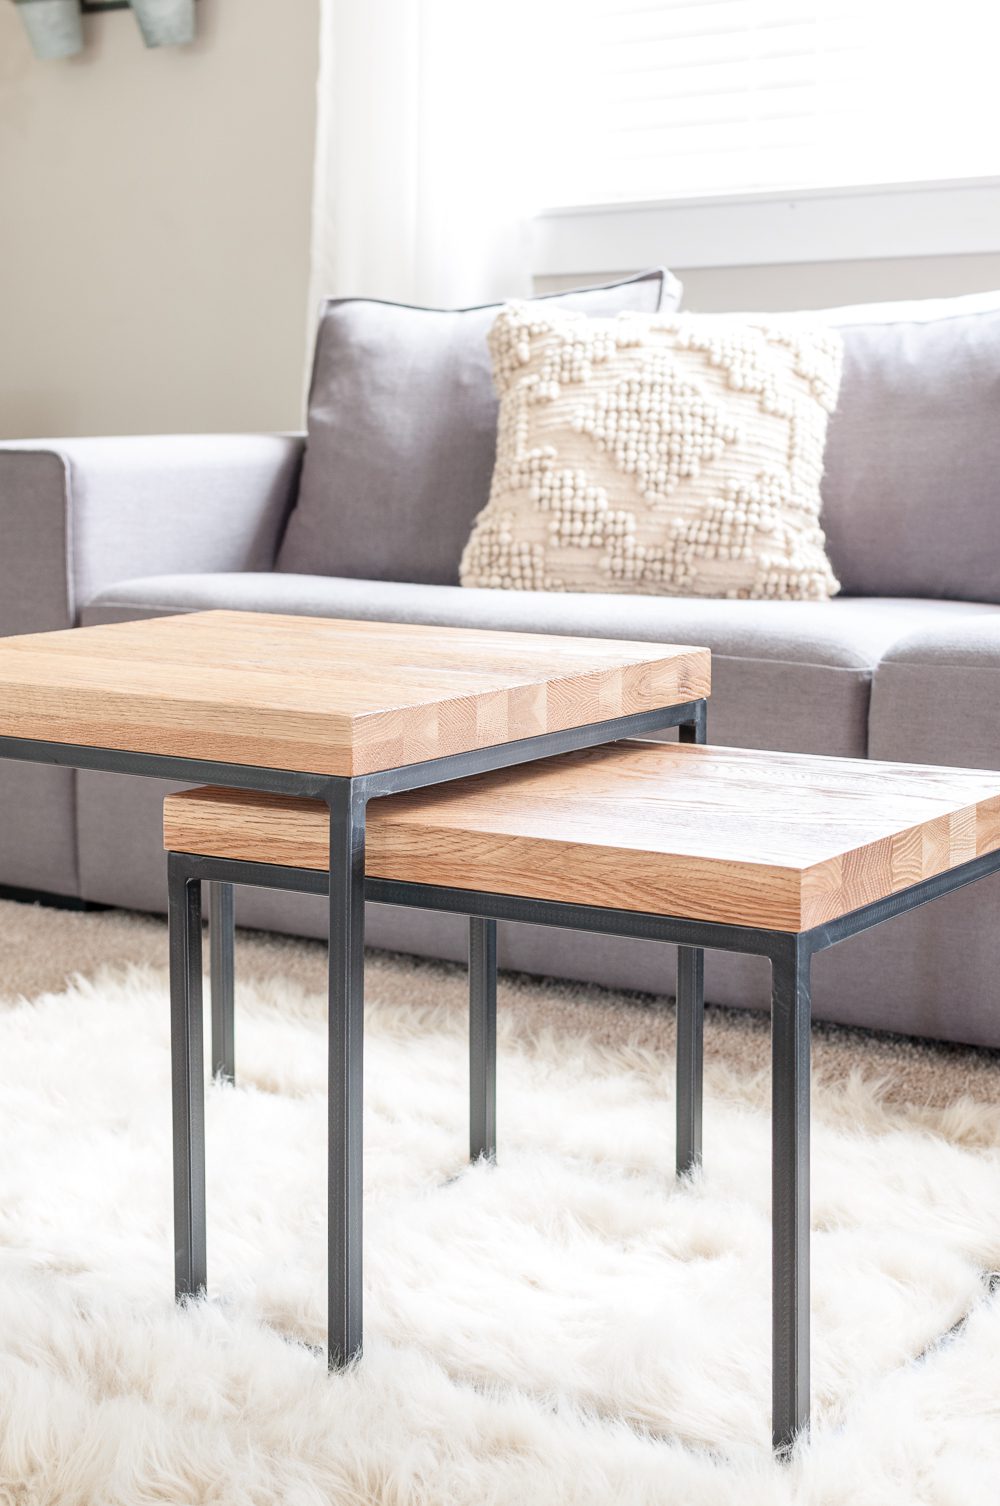 Nesting tables are the perfect addition to a minimalist living room providing surfaces that can also be space saving! 